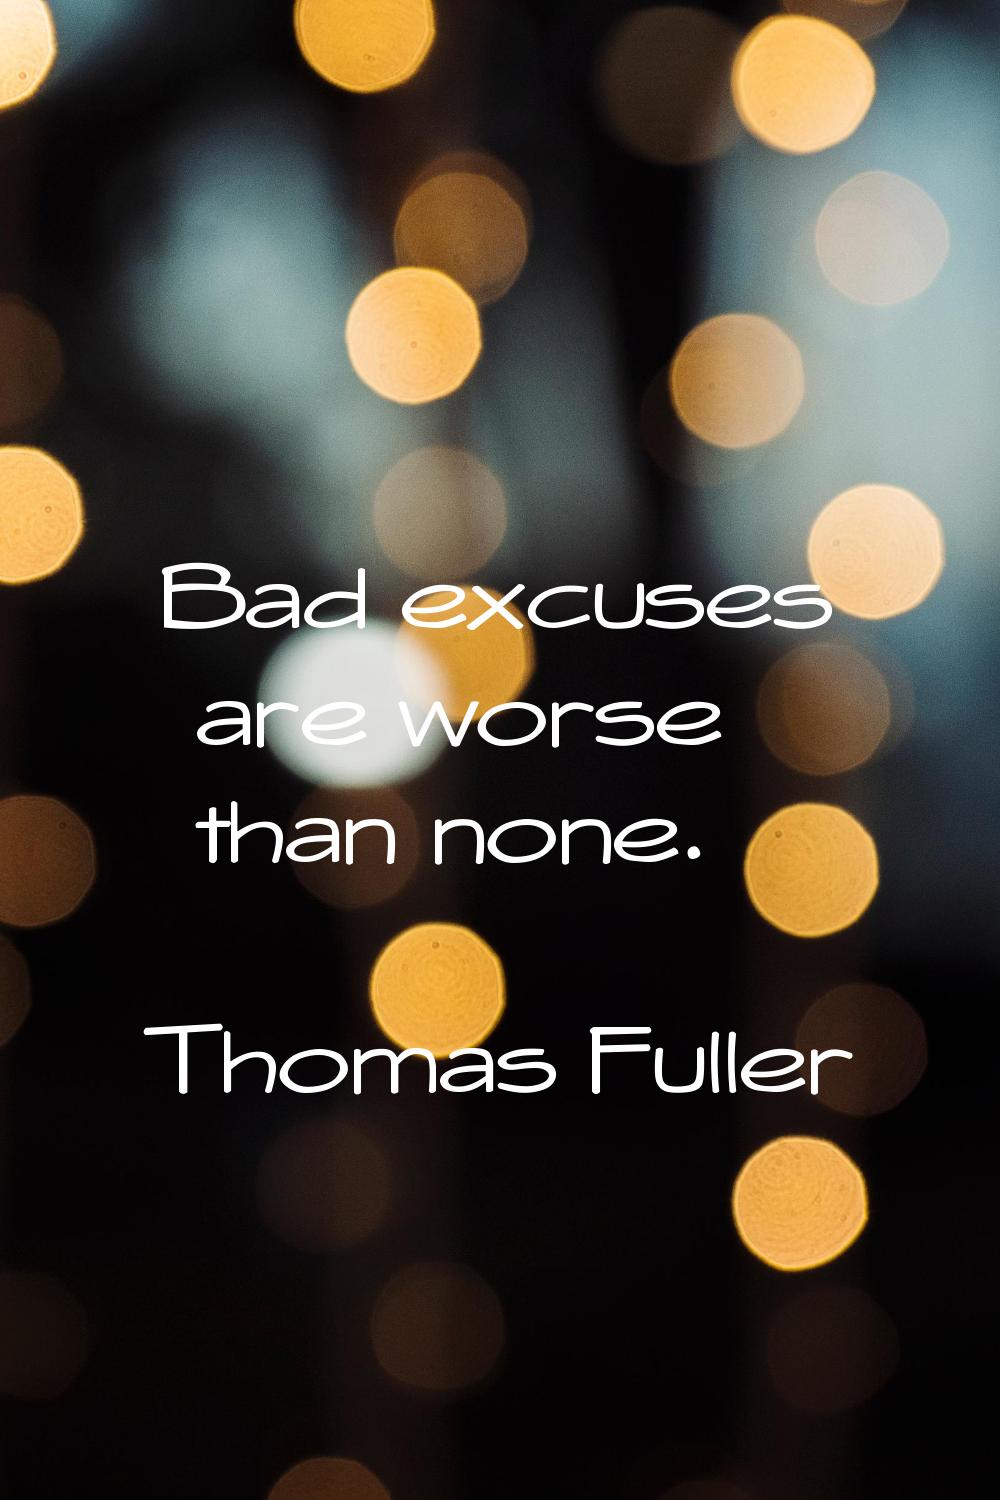 Bad excuses are worse than none.